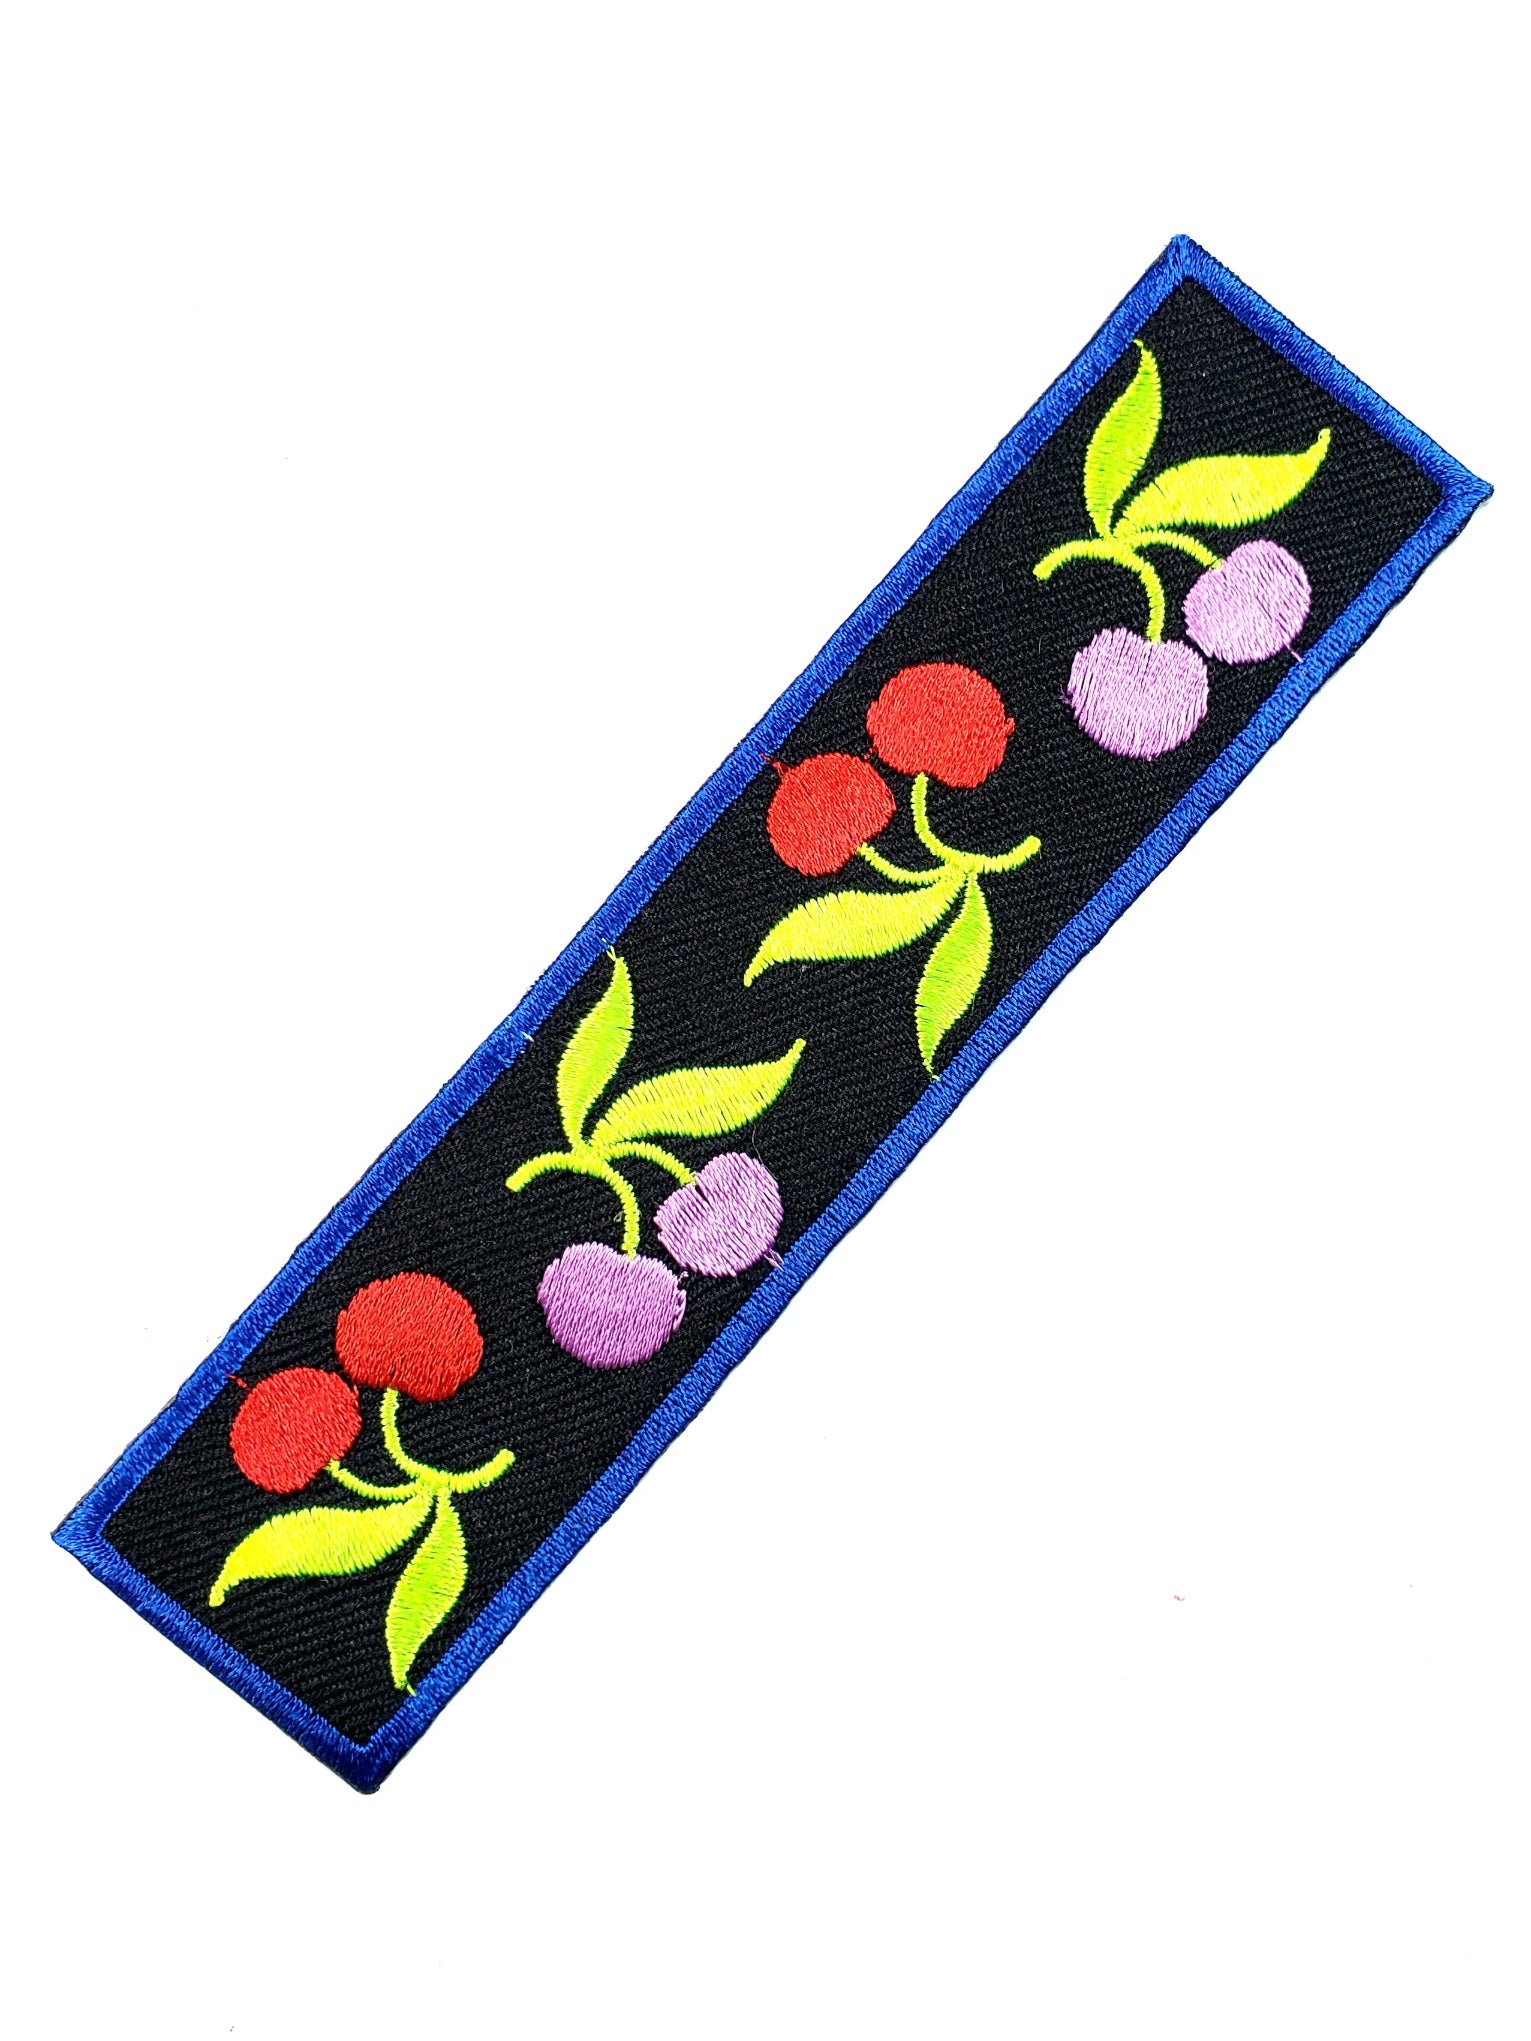 Alternating embroidered pink and red cherry pairs on a rectangular strip of black canvas with blue stitched border